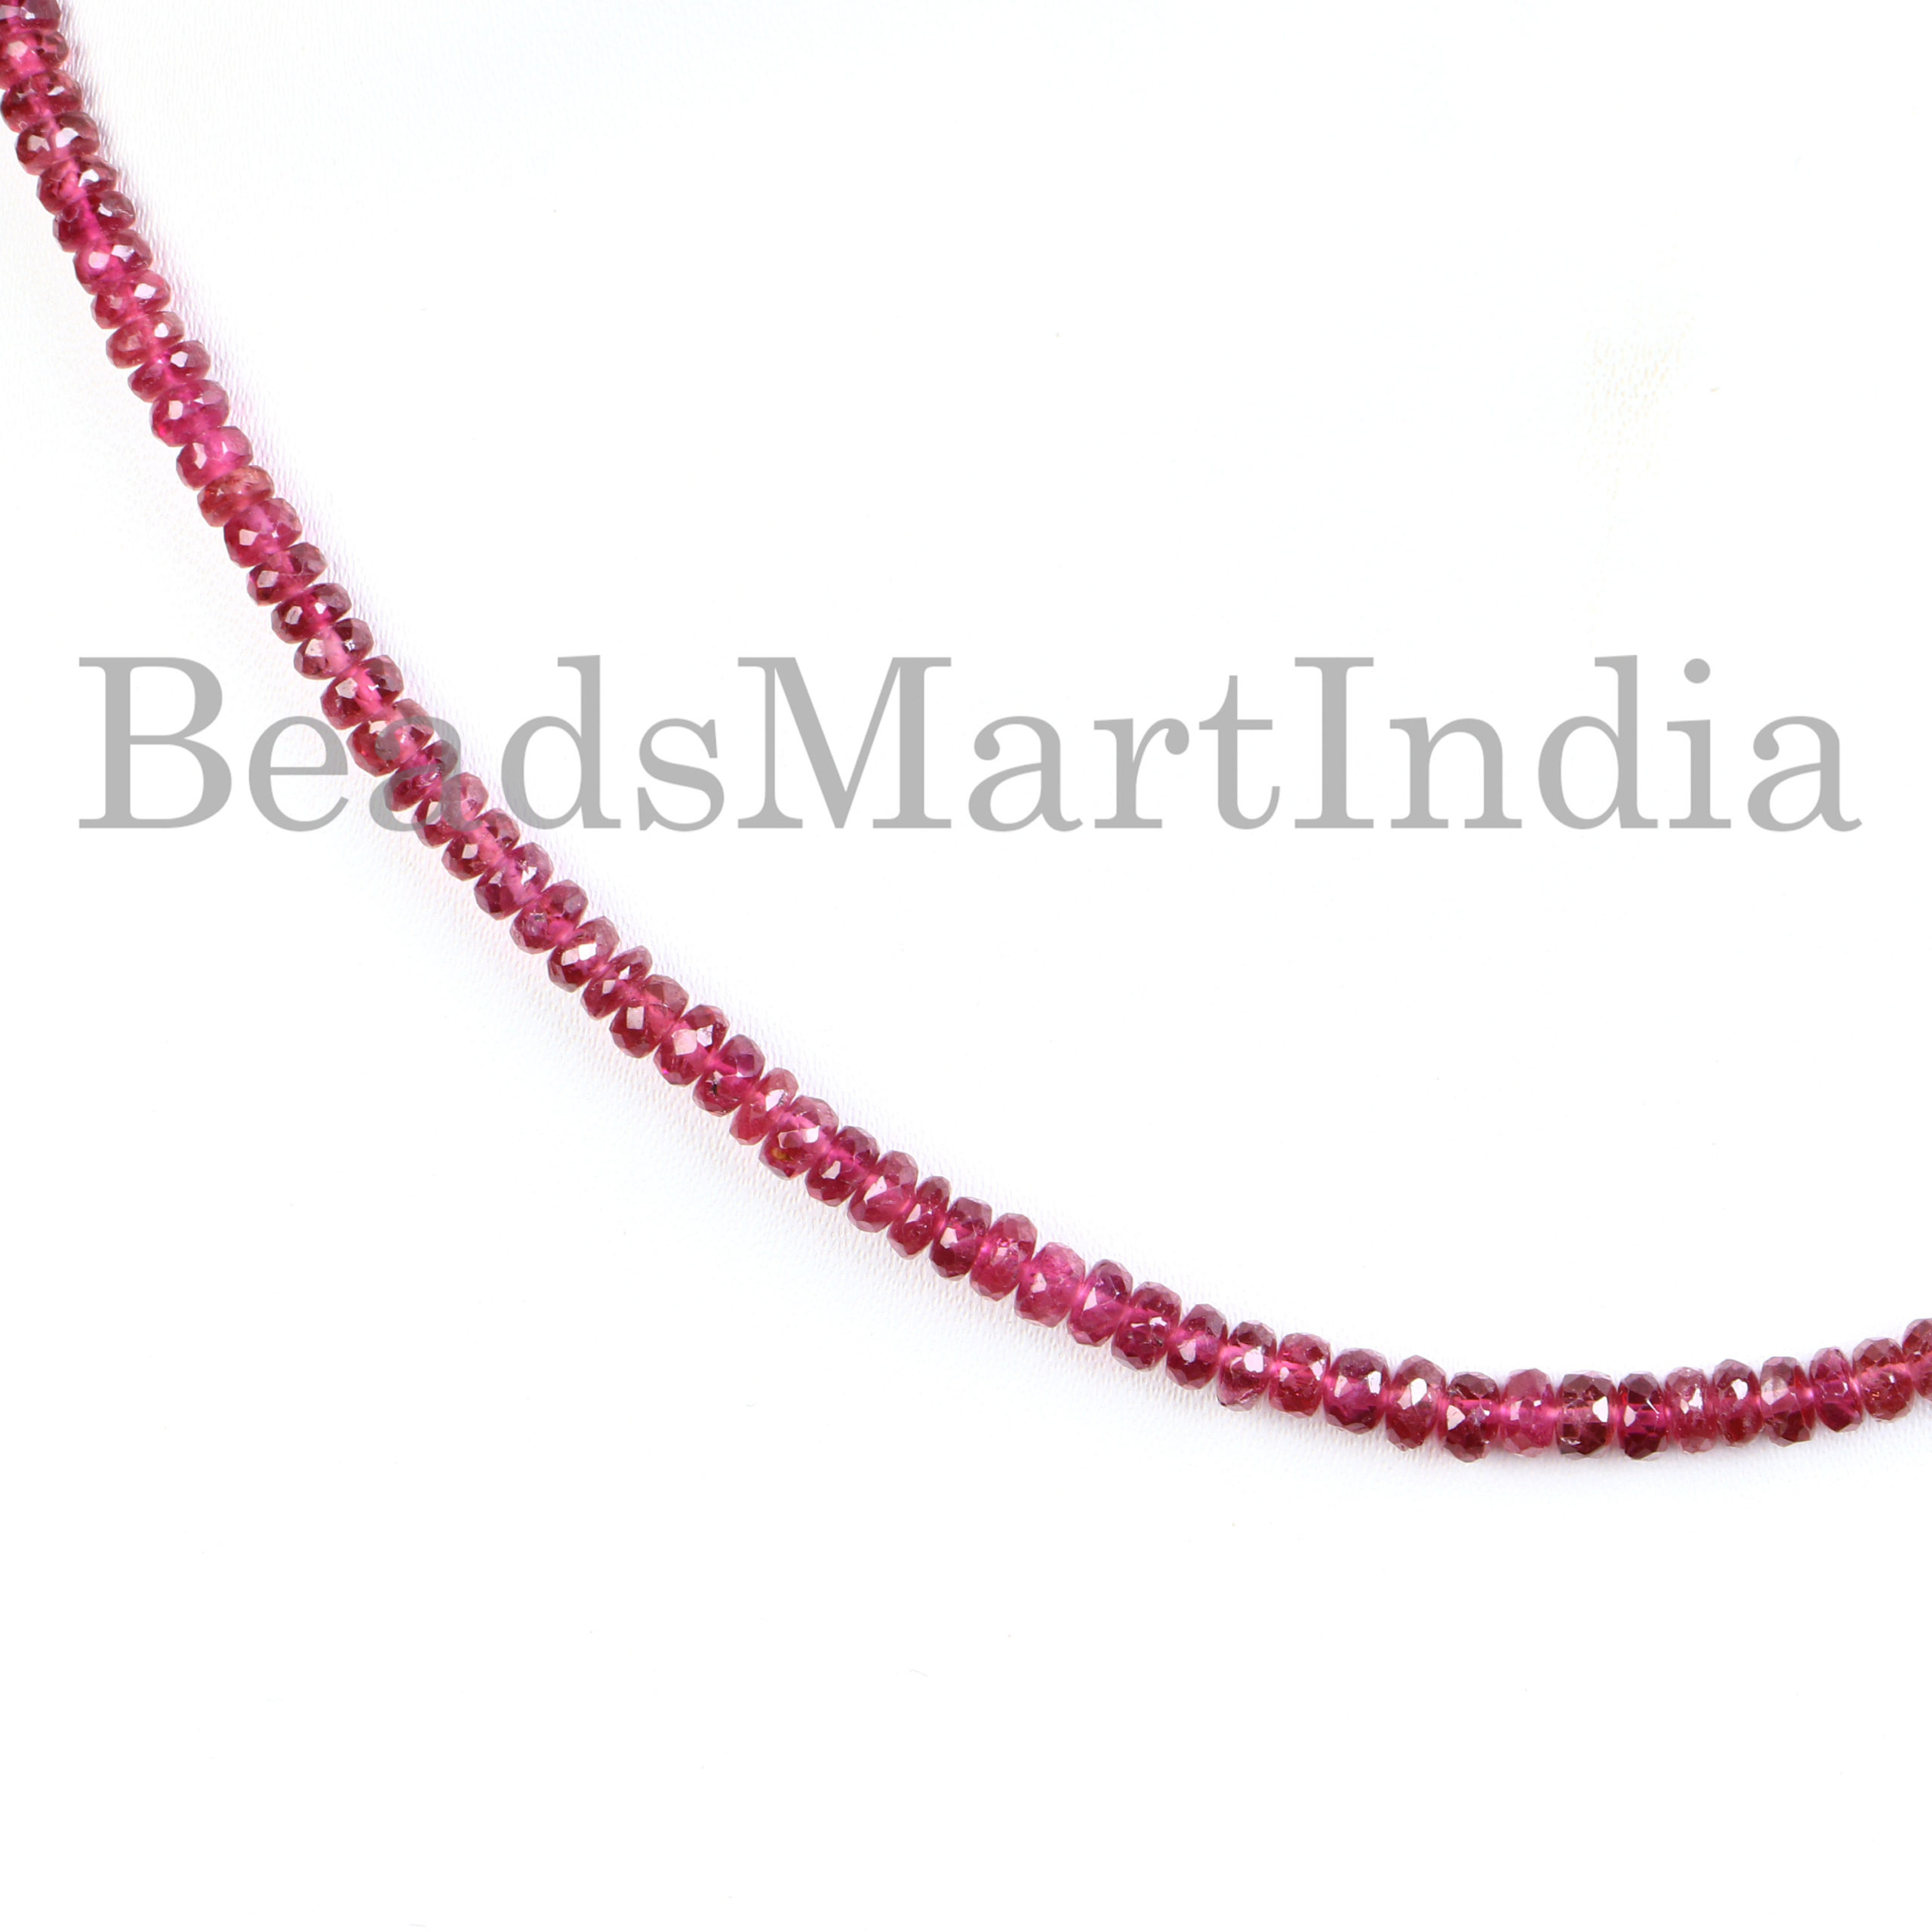 2.75-4 Mm Rubellite Tourmaline Faceted Necklace Beads,tourmaline Faceted Rondelle Beads, Tourmaline Beads,rubellite Tourmaline Necklace